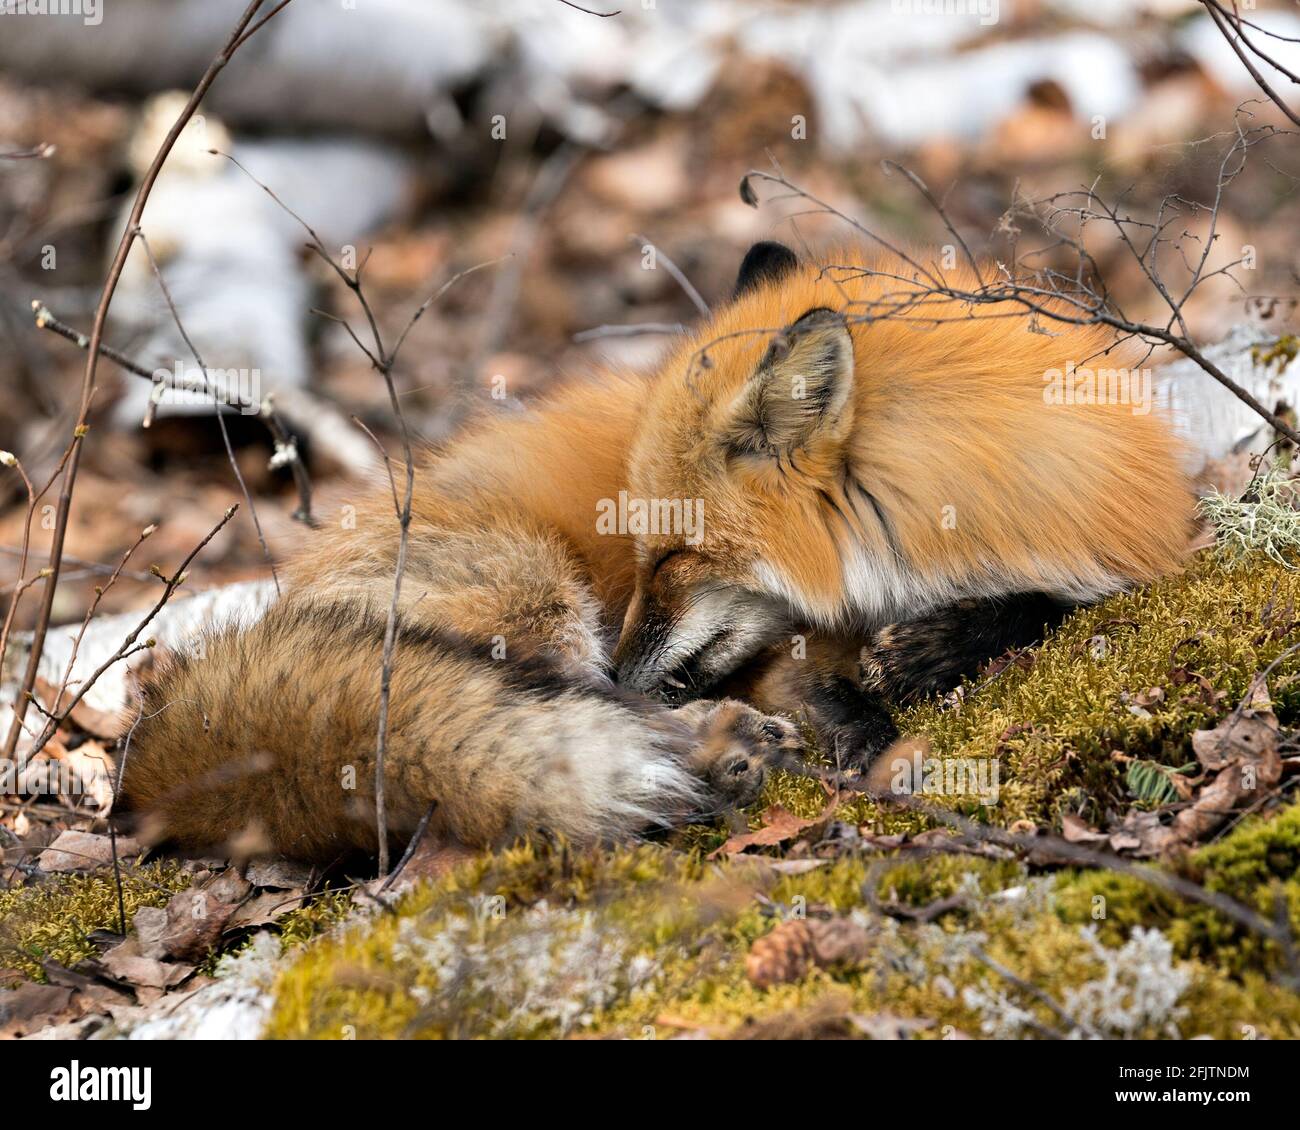 Red fox close-up profile view resting on moss with a blur background in the spring season displaying fox tail, fur, in its environment and habitat.  F Stock Photo